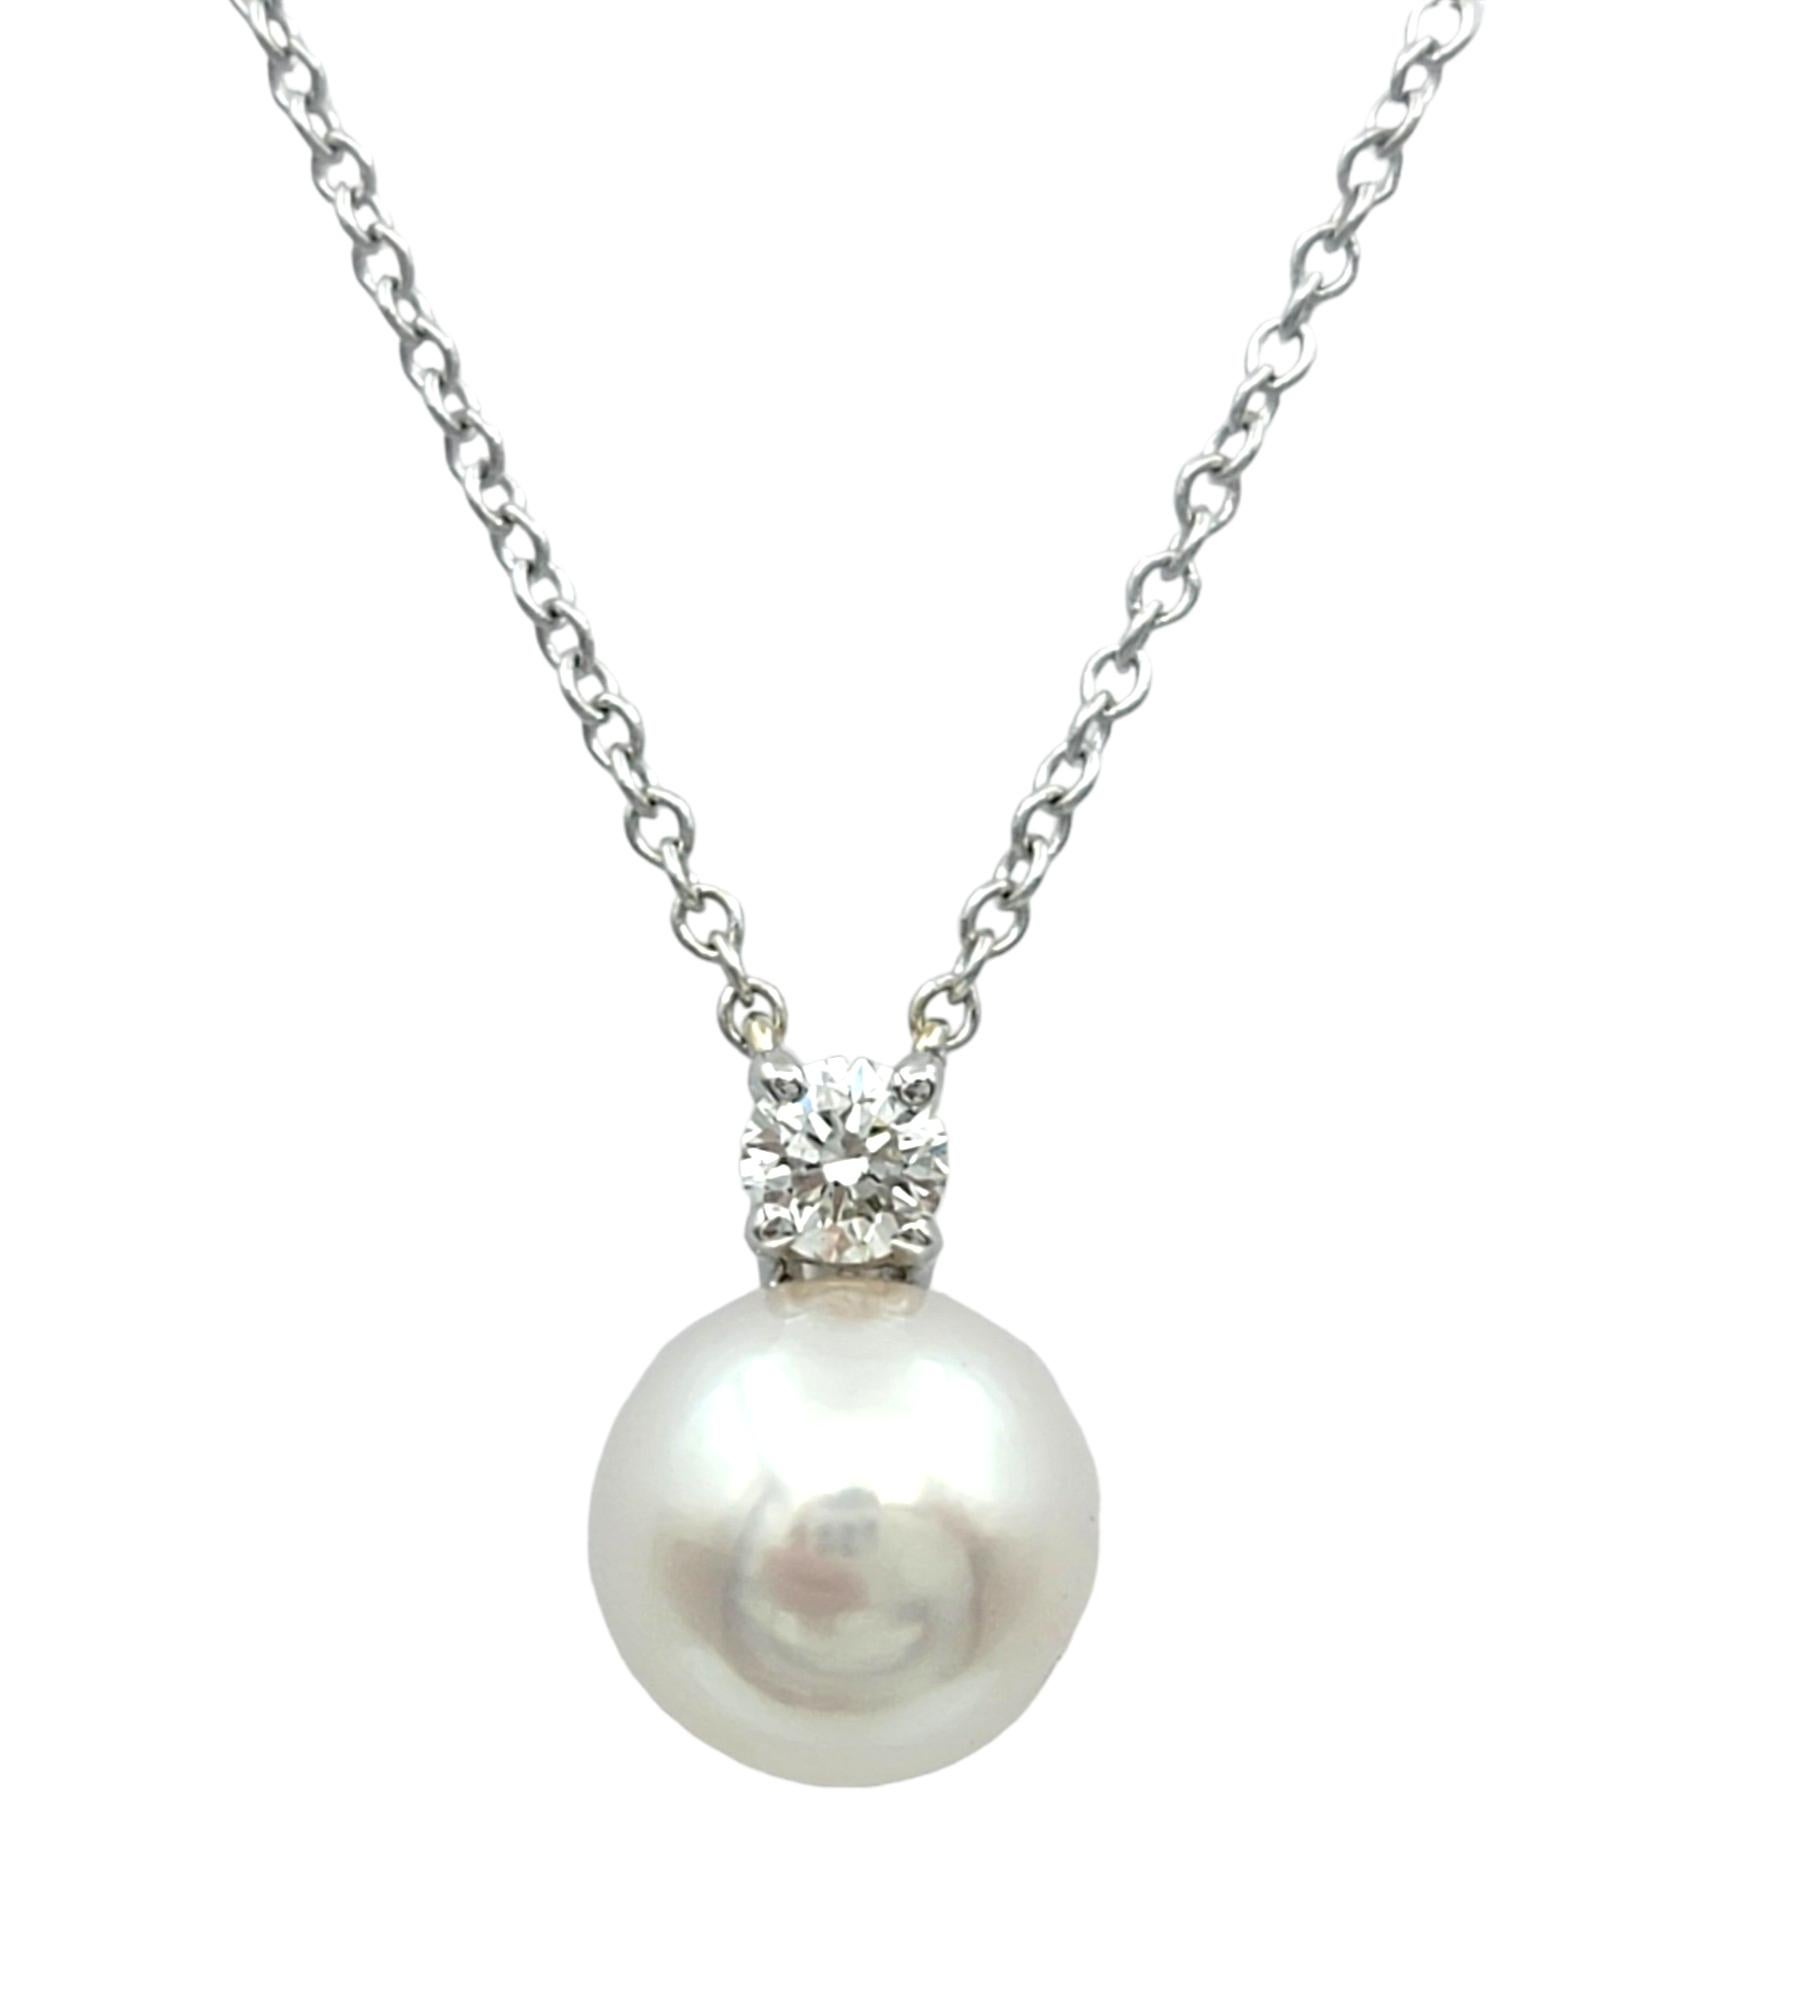 This gorgeous Tiffany & Co. Signature Pearl necklace is an exquisite piece of jewelry, showcasing timeless elegance and sophistication. The necklace is crafted with a chain made of 18 karat white gold, providing a luxurious and durable foundation.